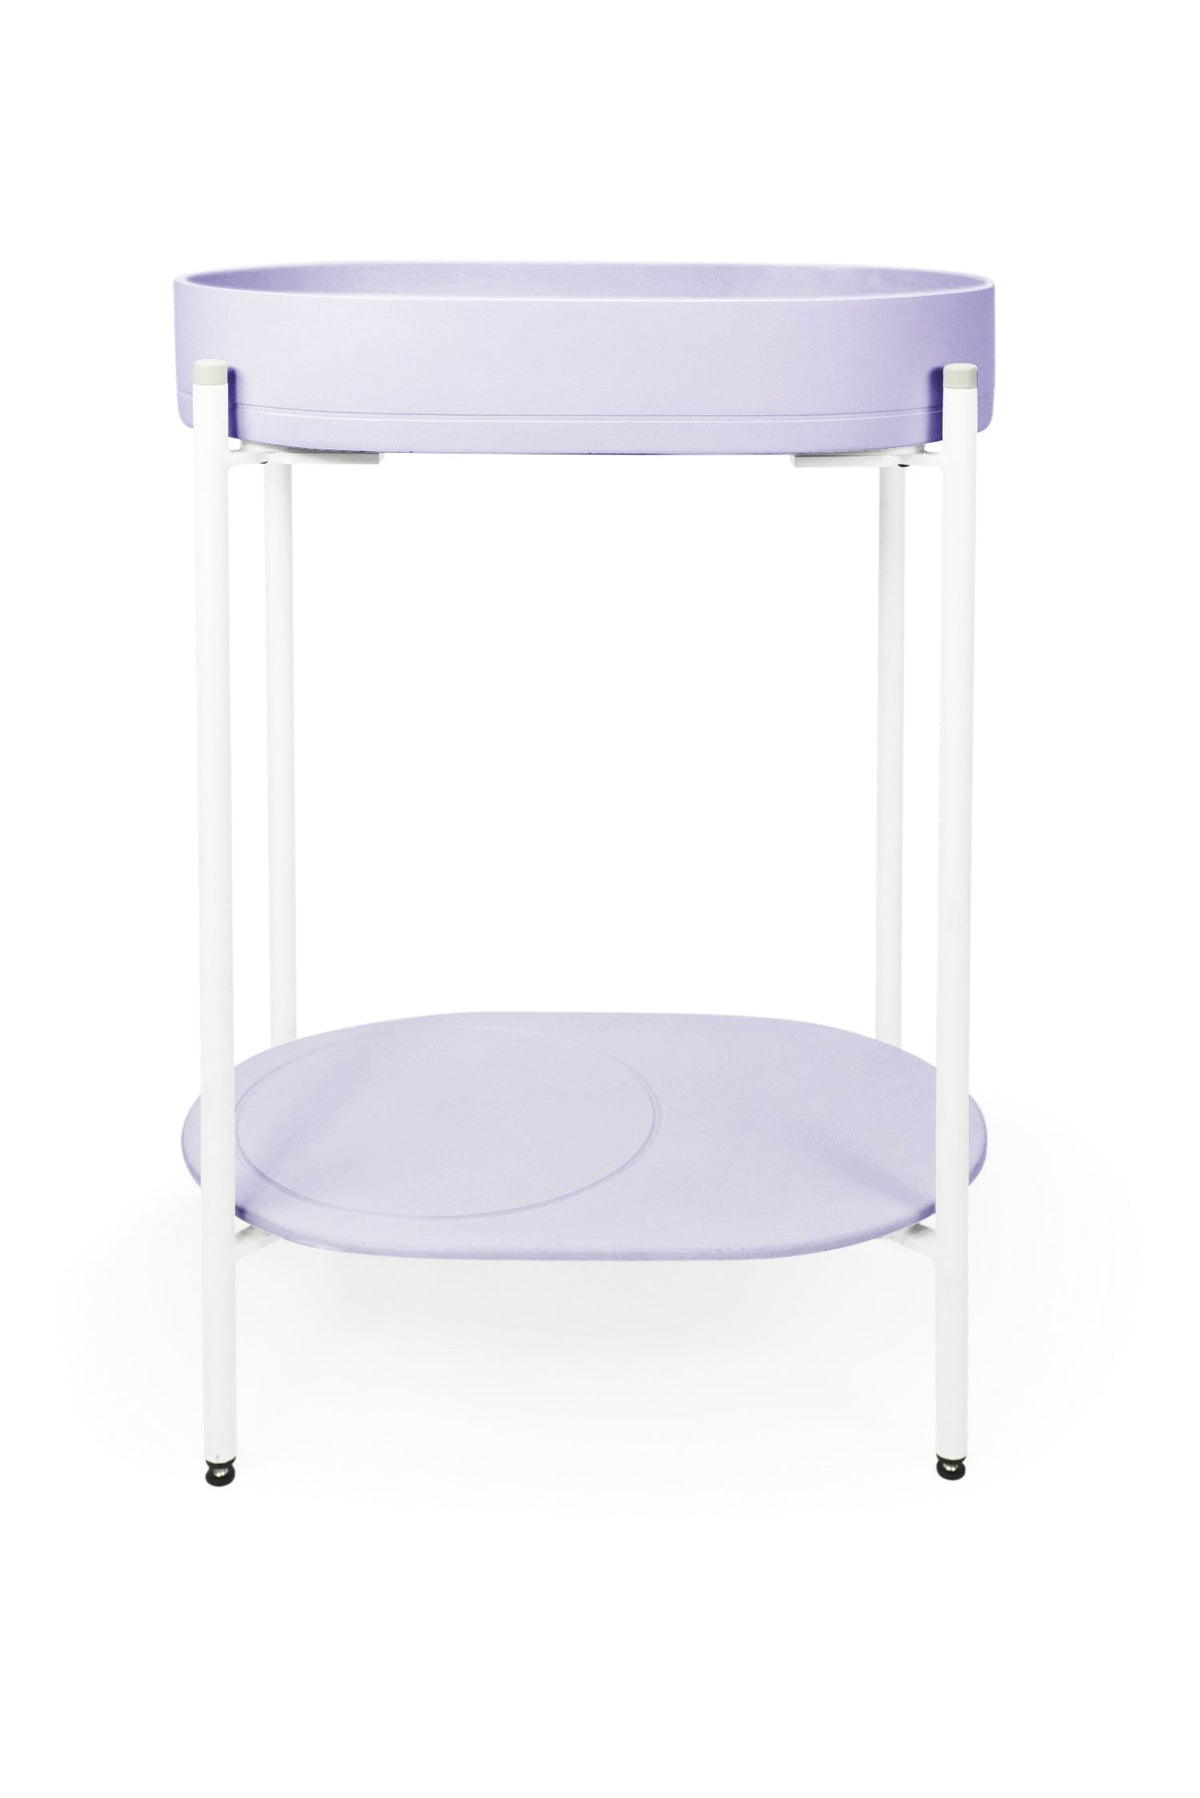 Pill Basin - Stand (Lilac,White Frame)